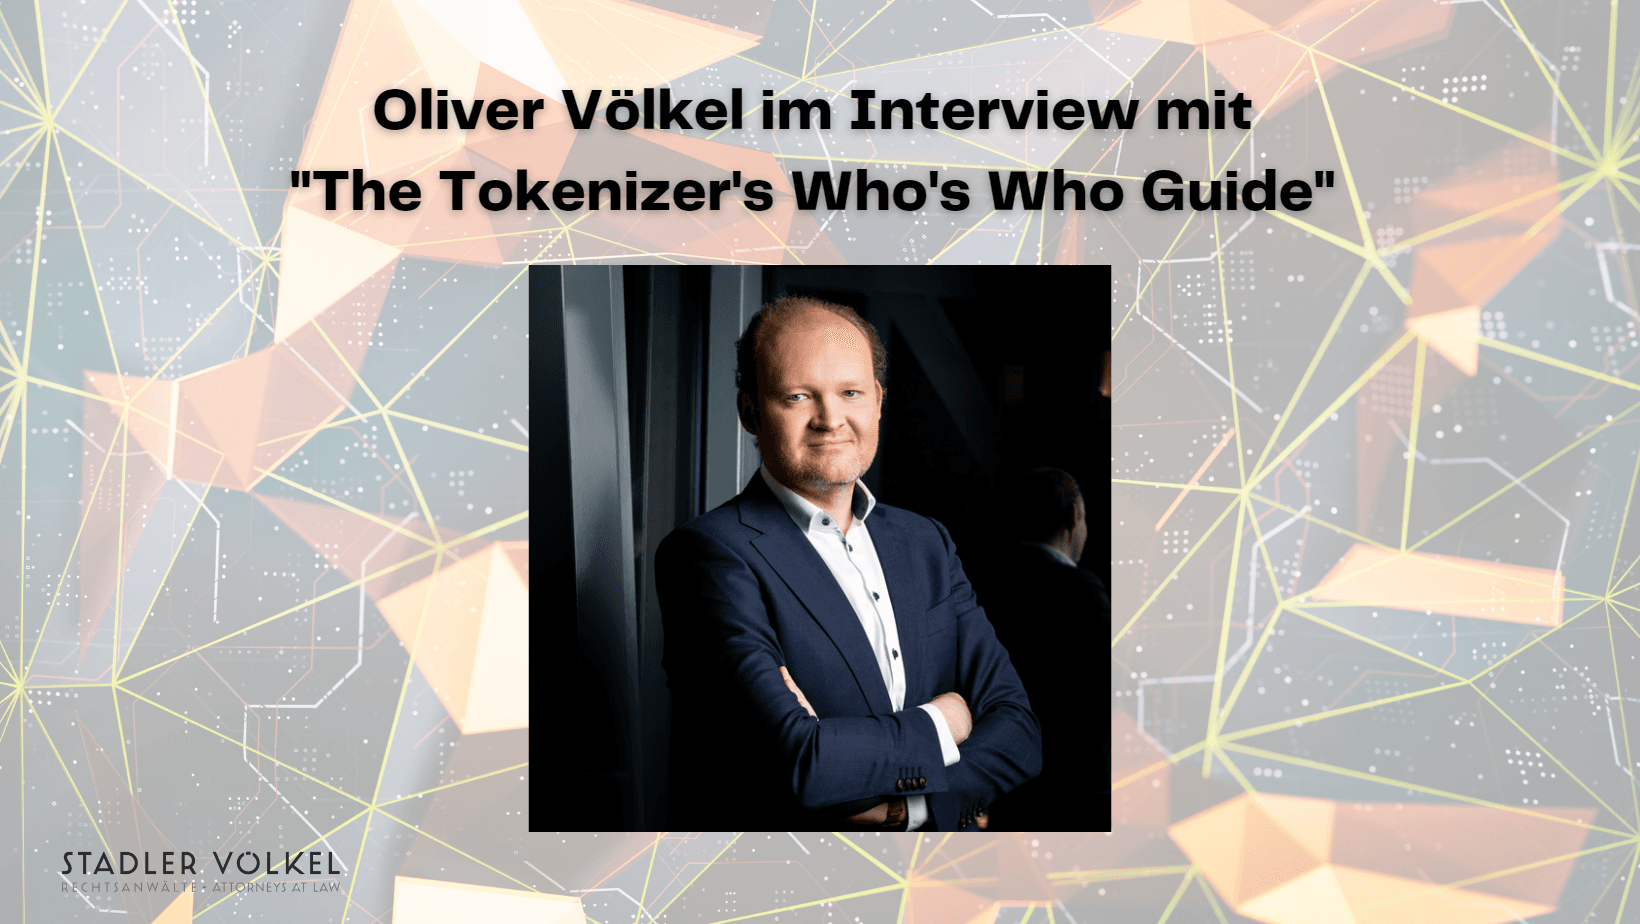 Oliver Völkel in an Interview with "The Tokenizer's Who's Who Guide"